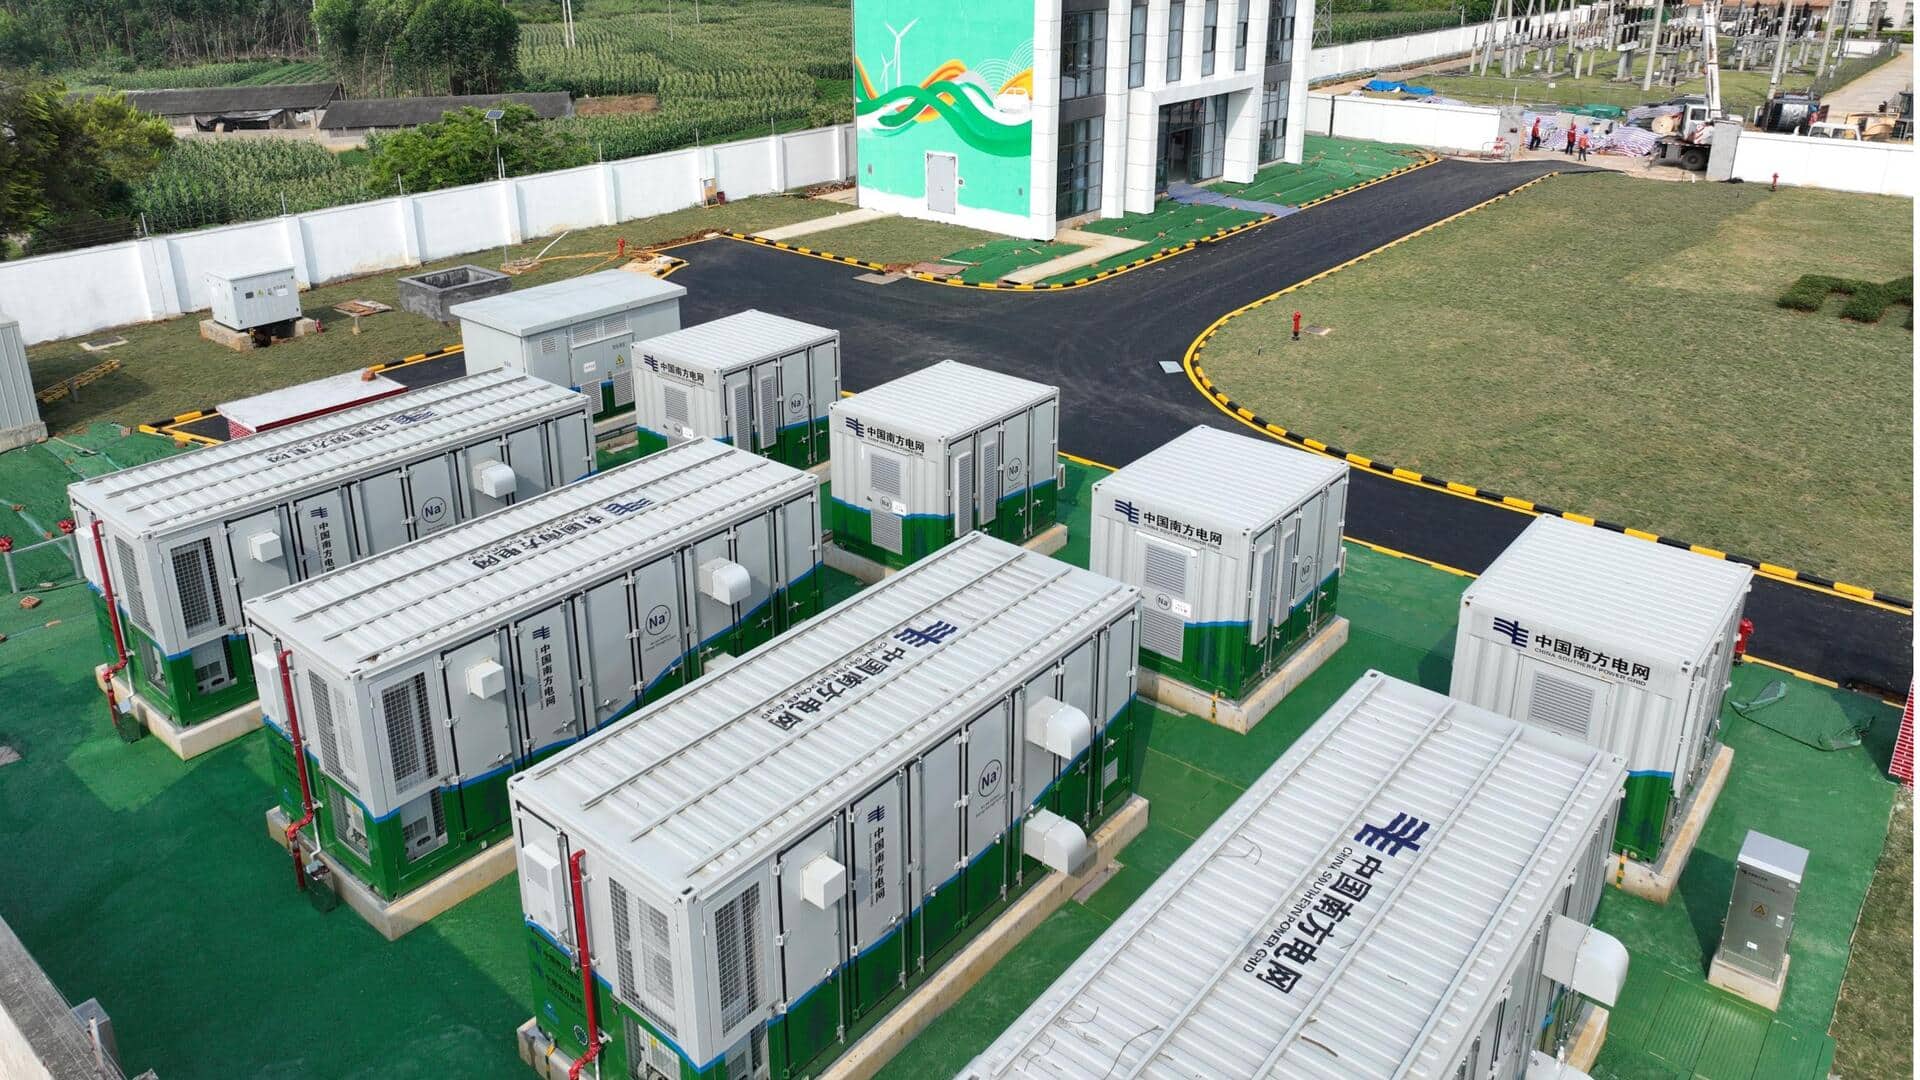 China launches sodium-ion battery energy storage station: Here's why